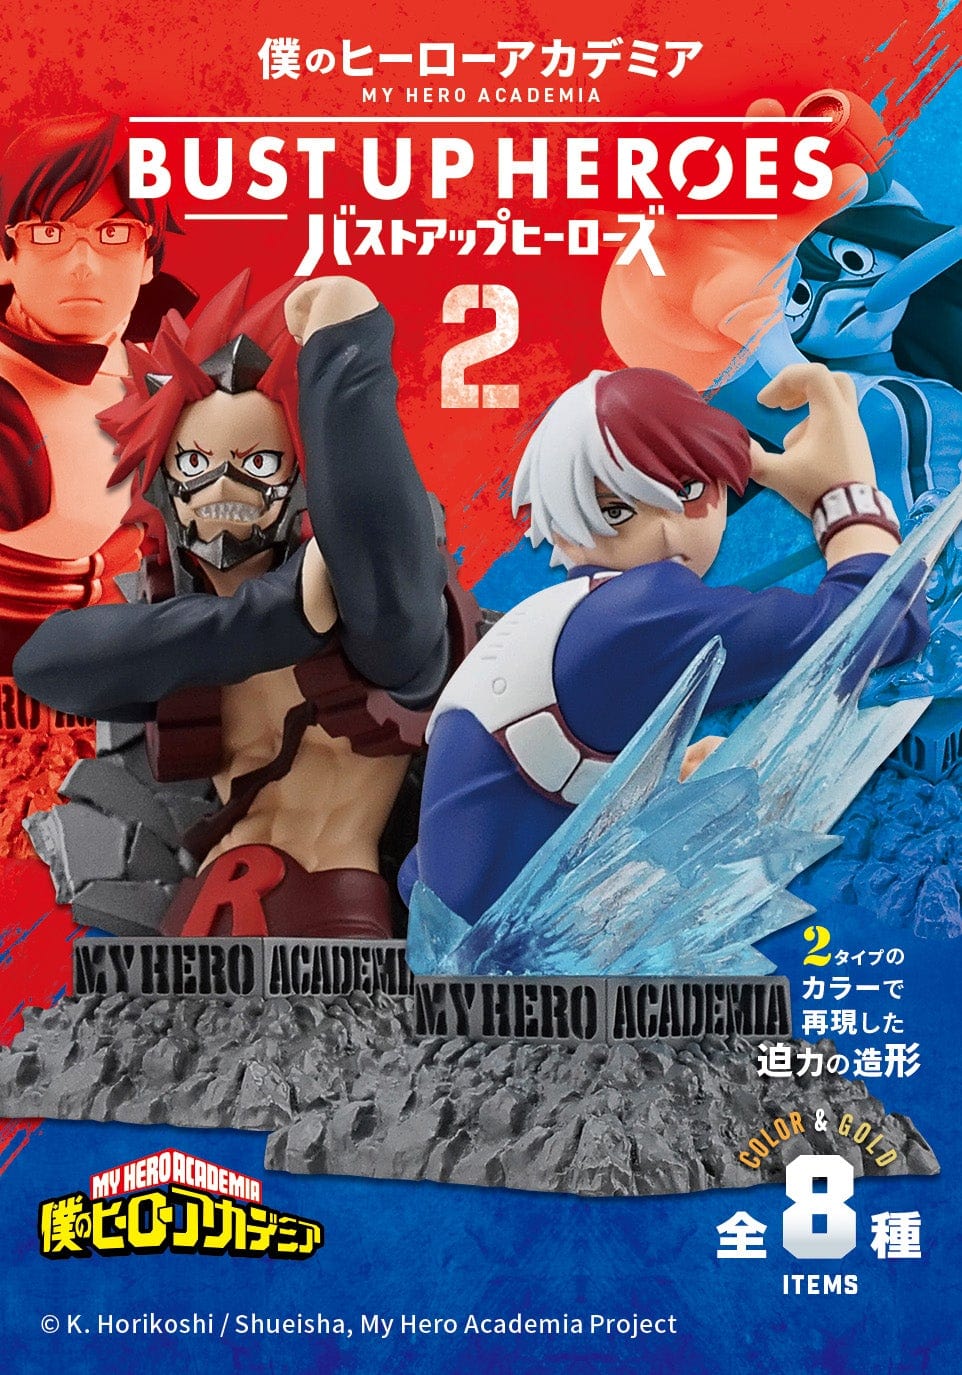 F-toys confect MY HERO ACADEMIA BUST UP HEROES 2